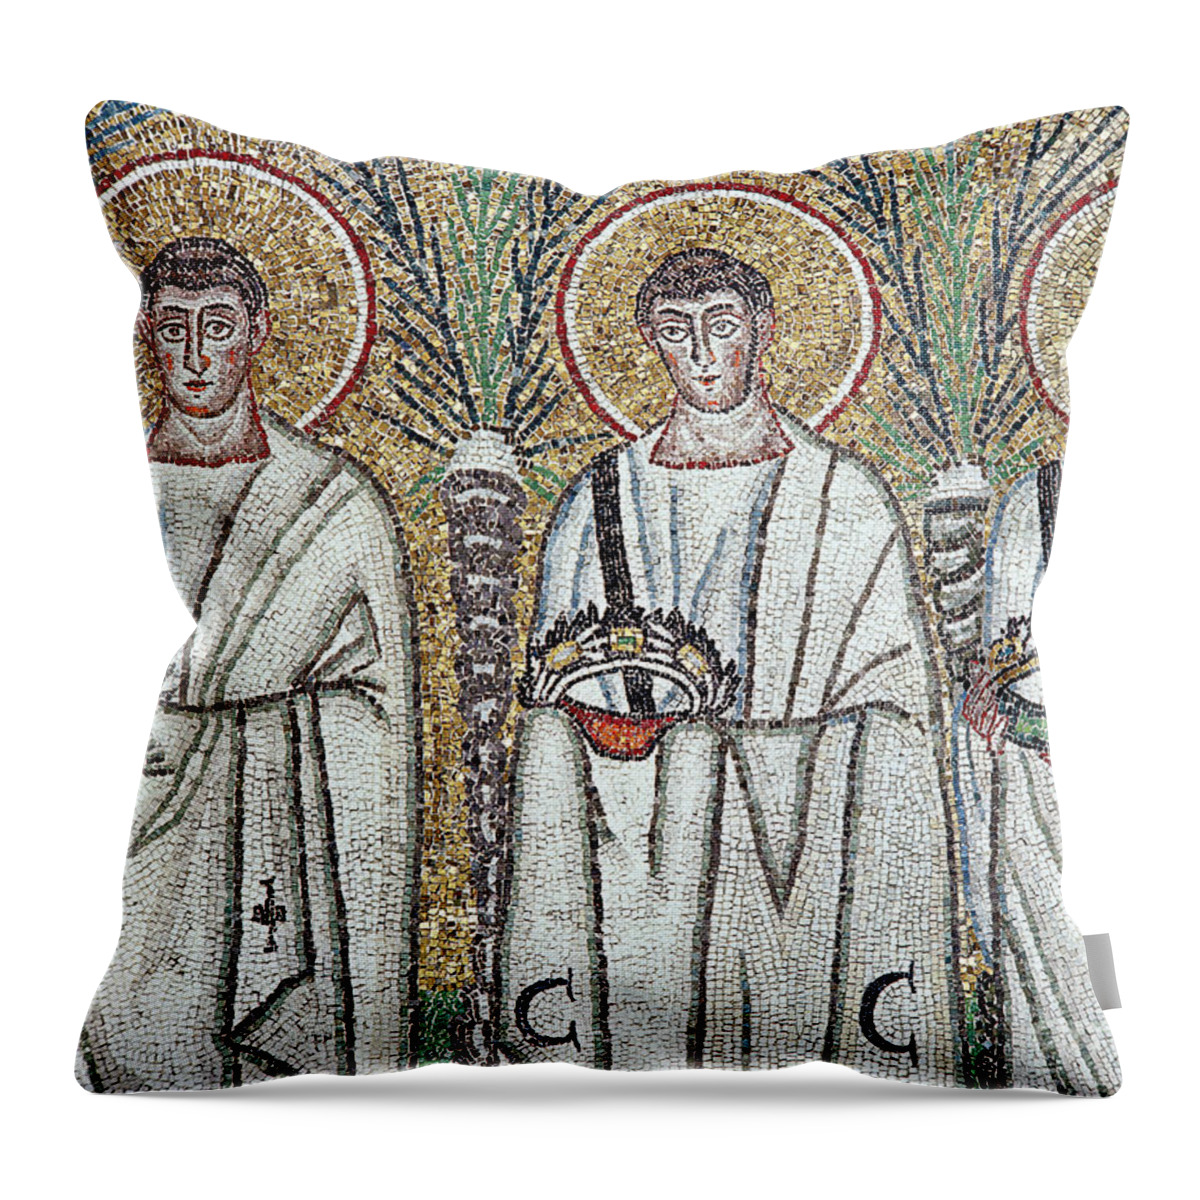 Mosaic Throw Pillow featuring the photograph Procession Of The Martyrs, Mosaic, Detail by Byzantine School